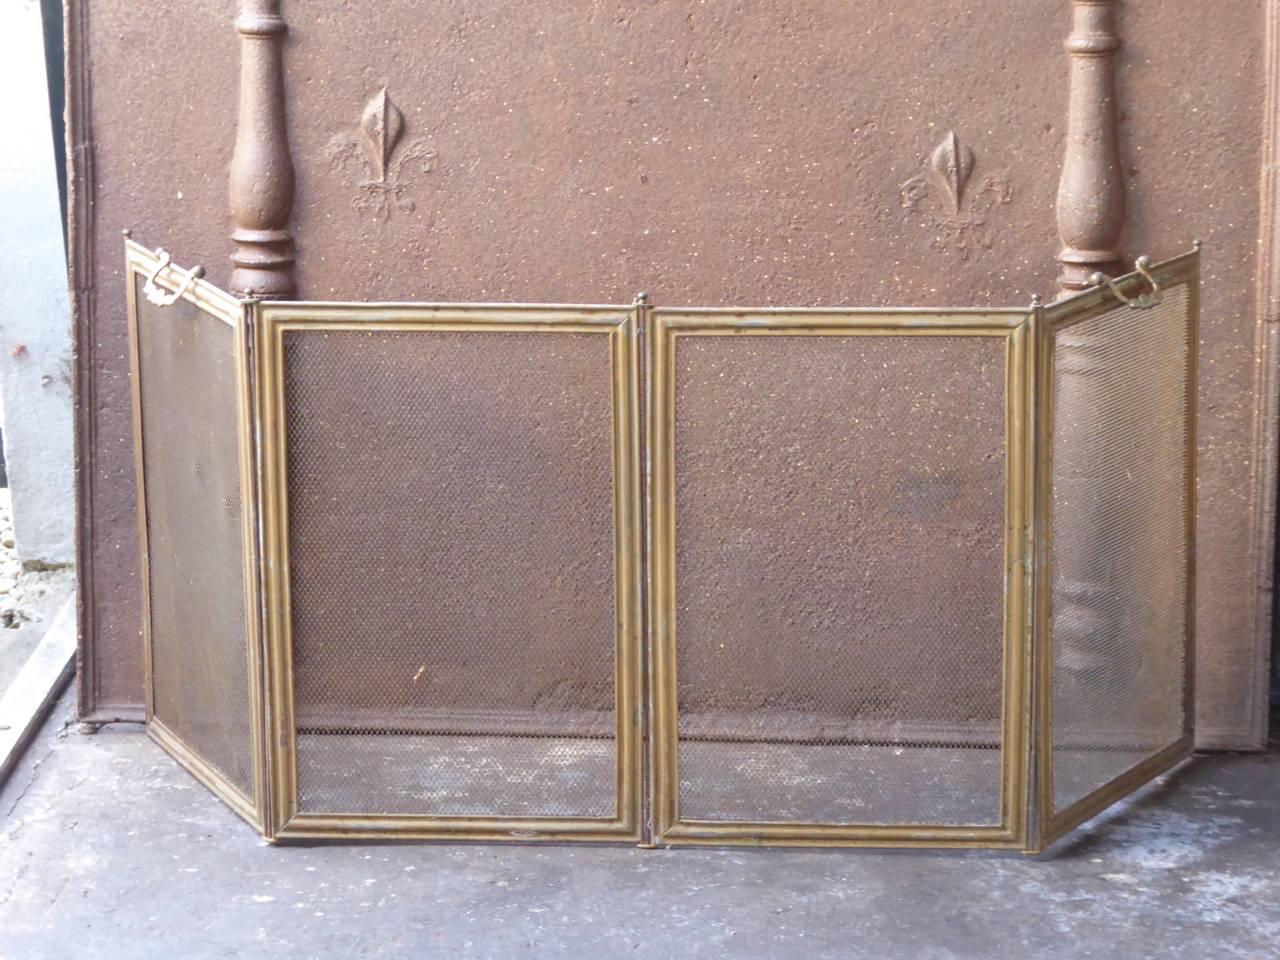 French Napoleon III fireplace screen made of iron and iron mesh.

We have a unique and specialized collection of antique and used fireplace accessories consisting of more than 1000 listings at 1stdibs. Amongst others we always have 300+ firebacks,